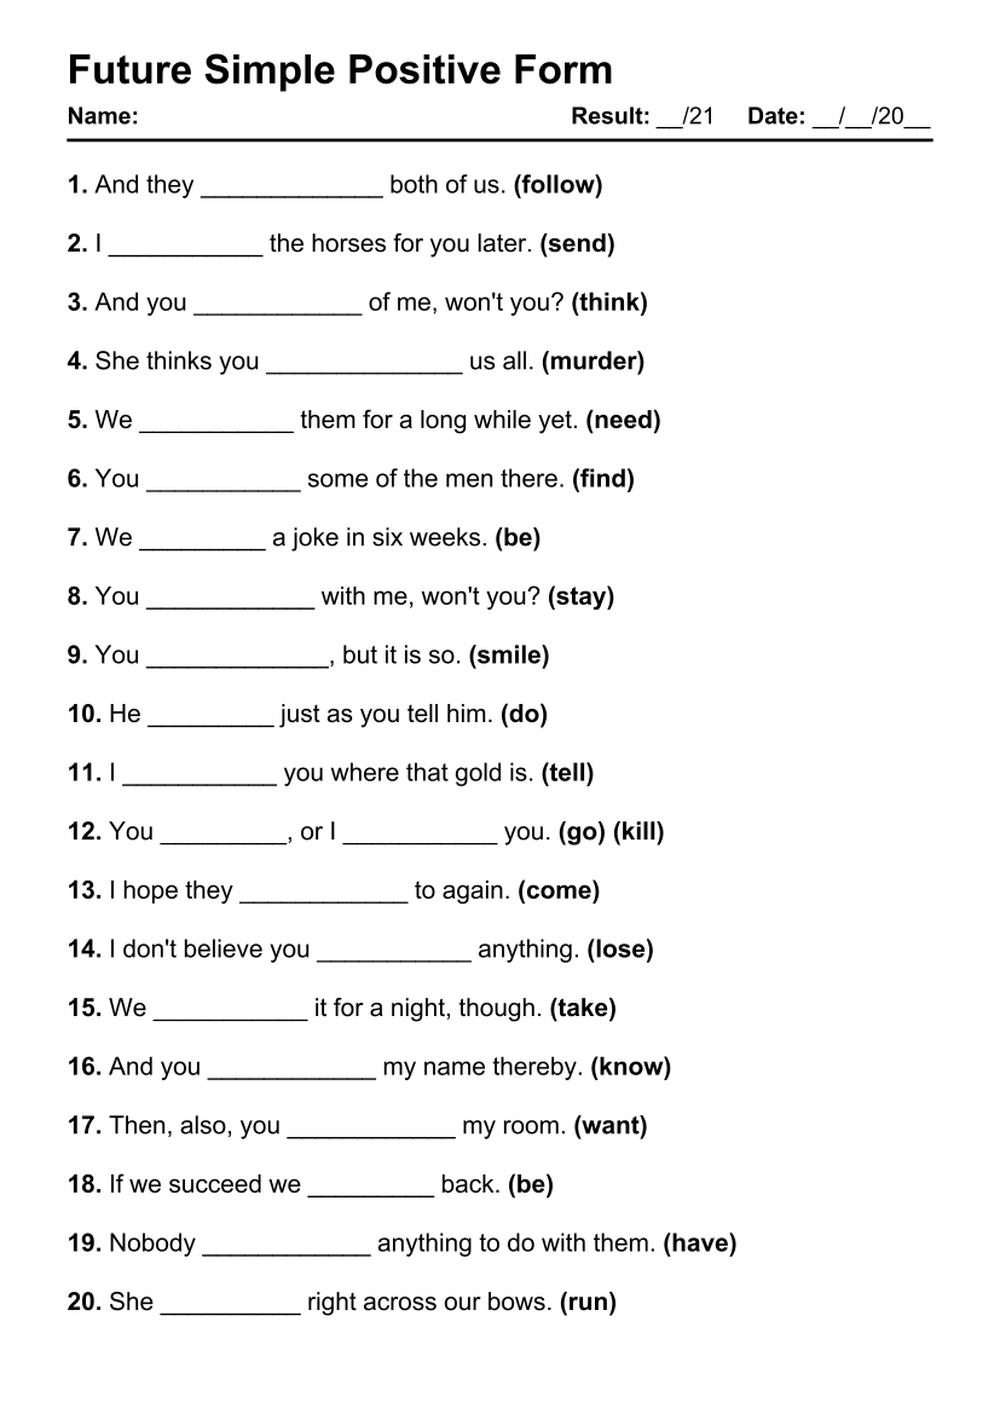 Printable Future Simple Positive Exercises - PDF Worksheet with Answers - Test 77